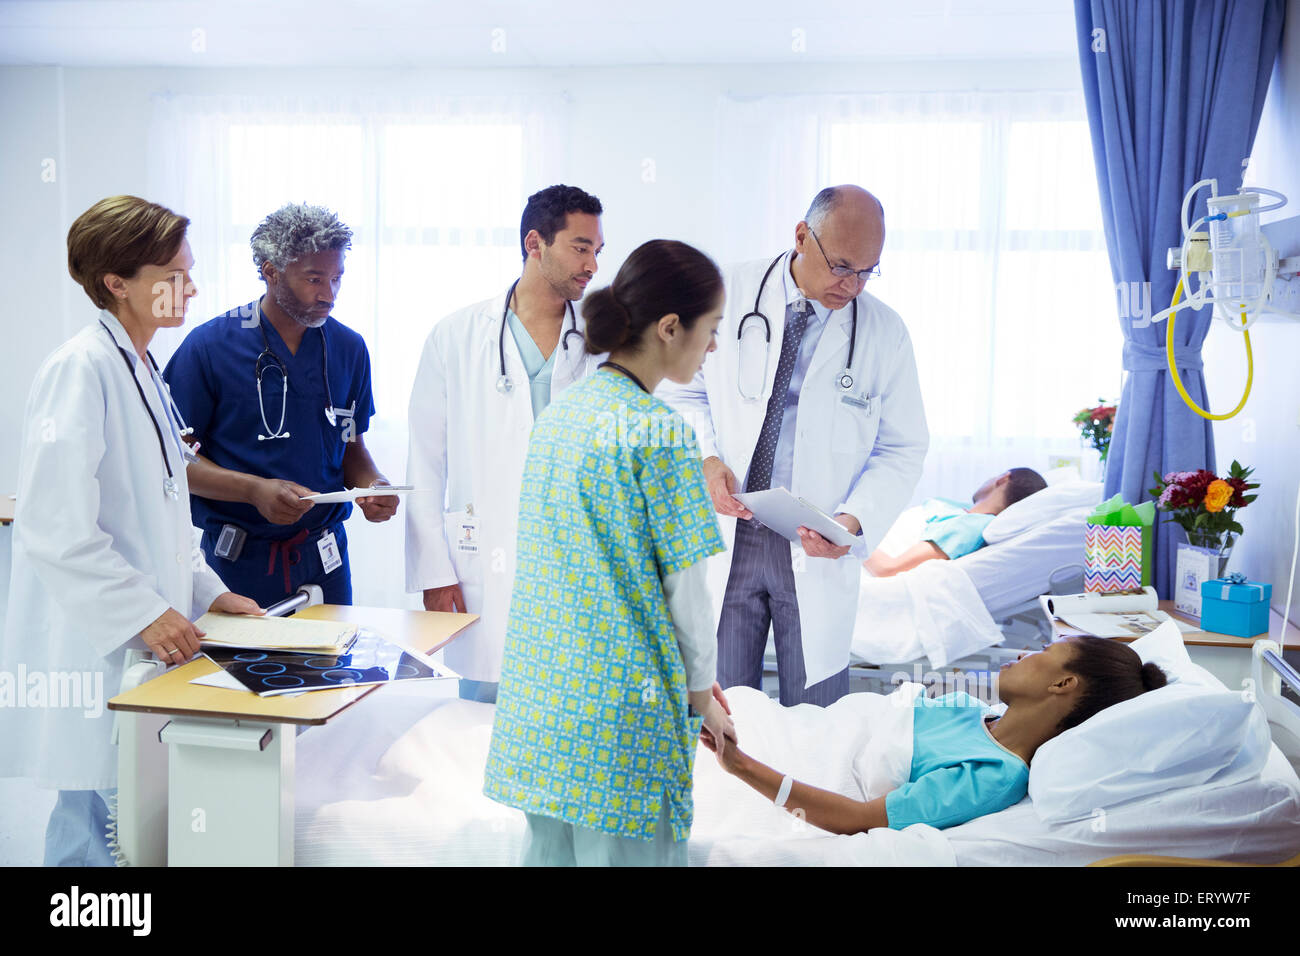 Doctors and nurse making rounds in hospital room Stock Photo